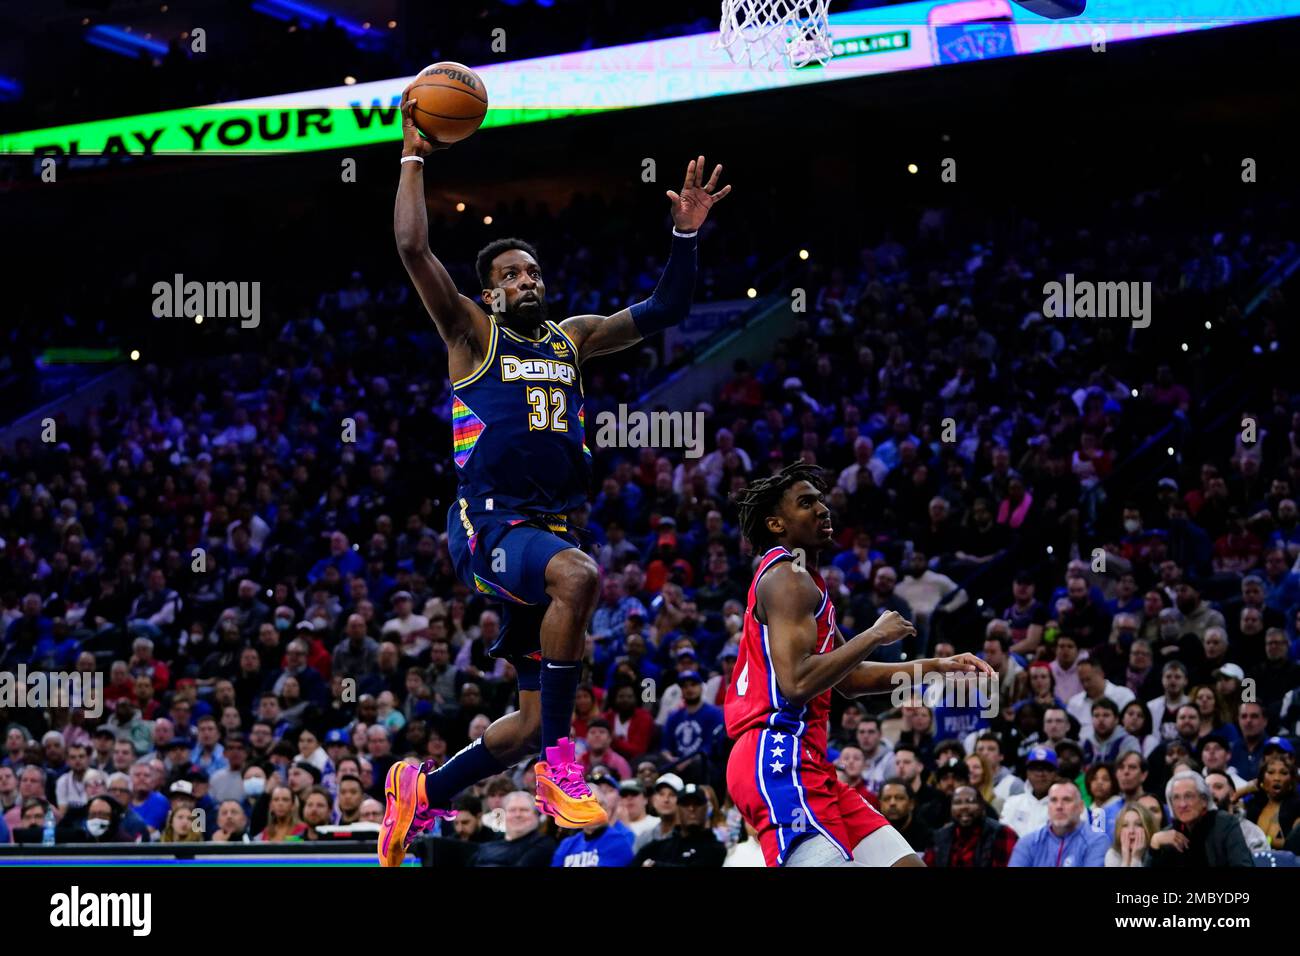 Denver Nuggets Jeff Green, left, goes up for a dunk past Philadelphia 76ers Tyrese Maxey during the first half of an NBA basketball game, Monday, March 14, 2022, in Philadelphia